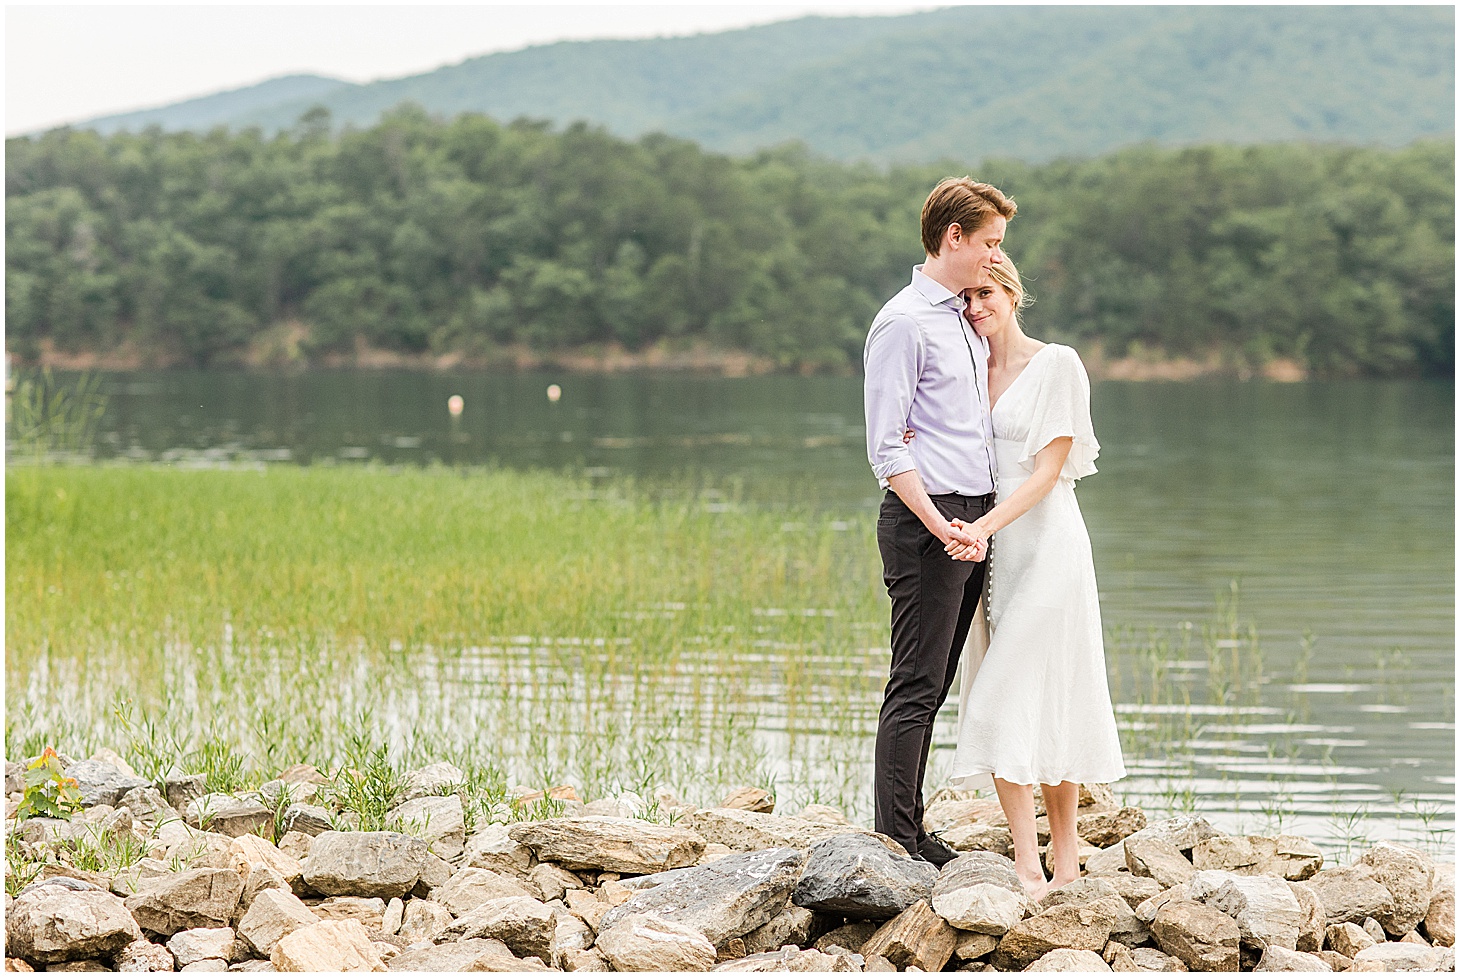 carvinscove_roanokeengagementsession_virginiaweddingphotographer_vaweddingphotographer_photo_0047-1.jpg